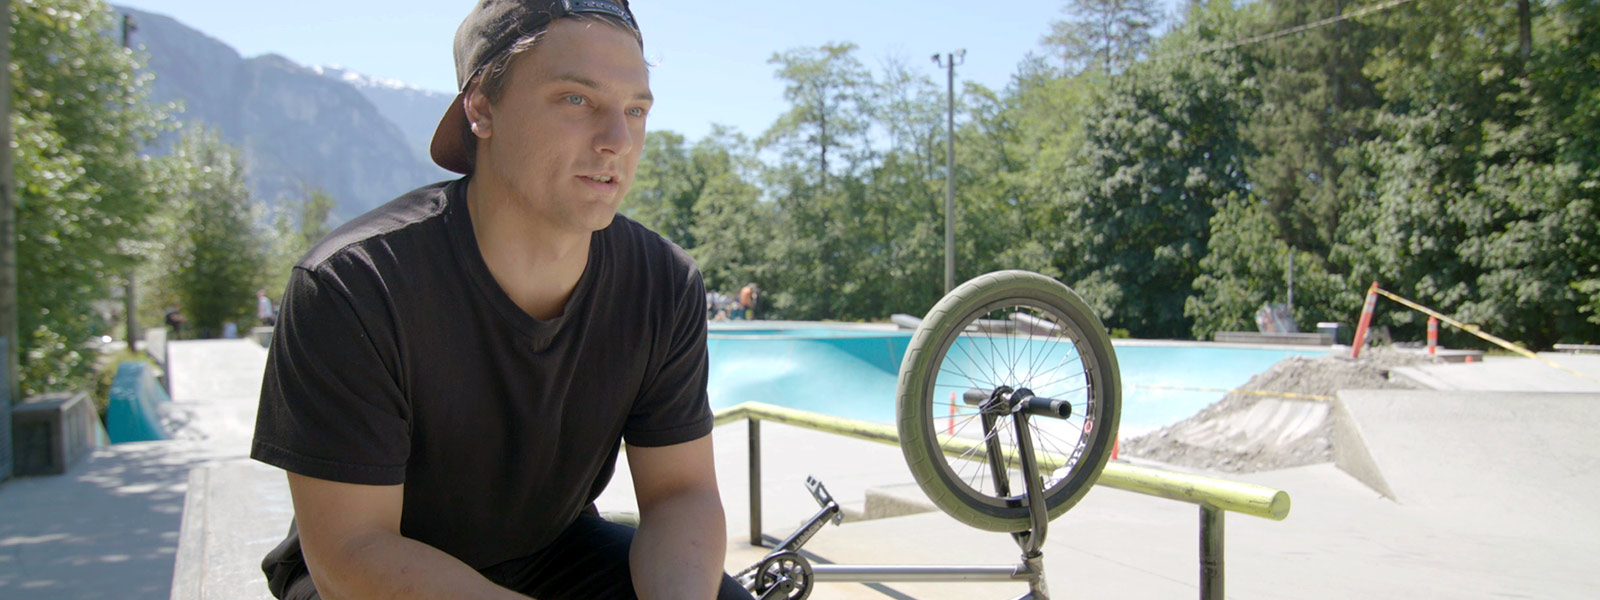 Matt Jensen sits in front of his BMX bike at a skate park, a major source of inspiration for making games.